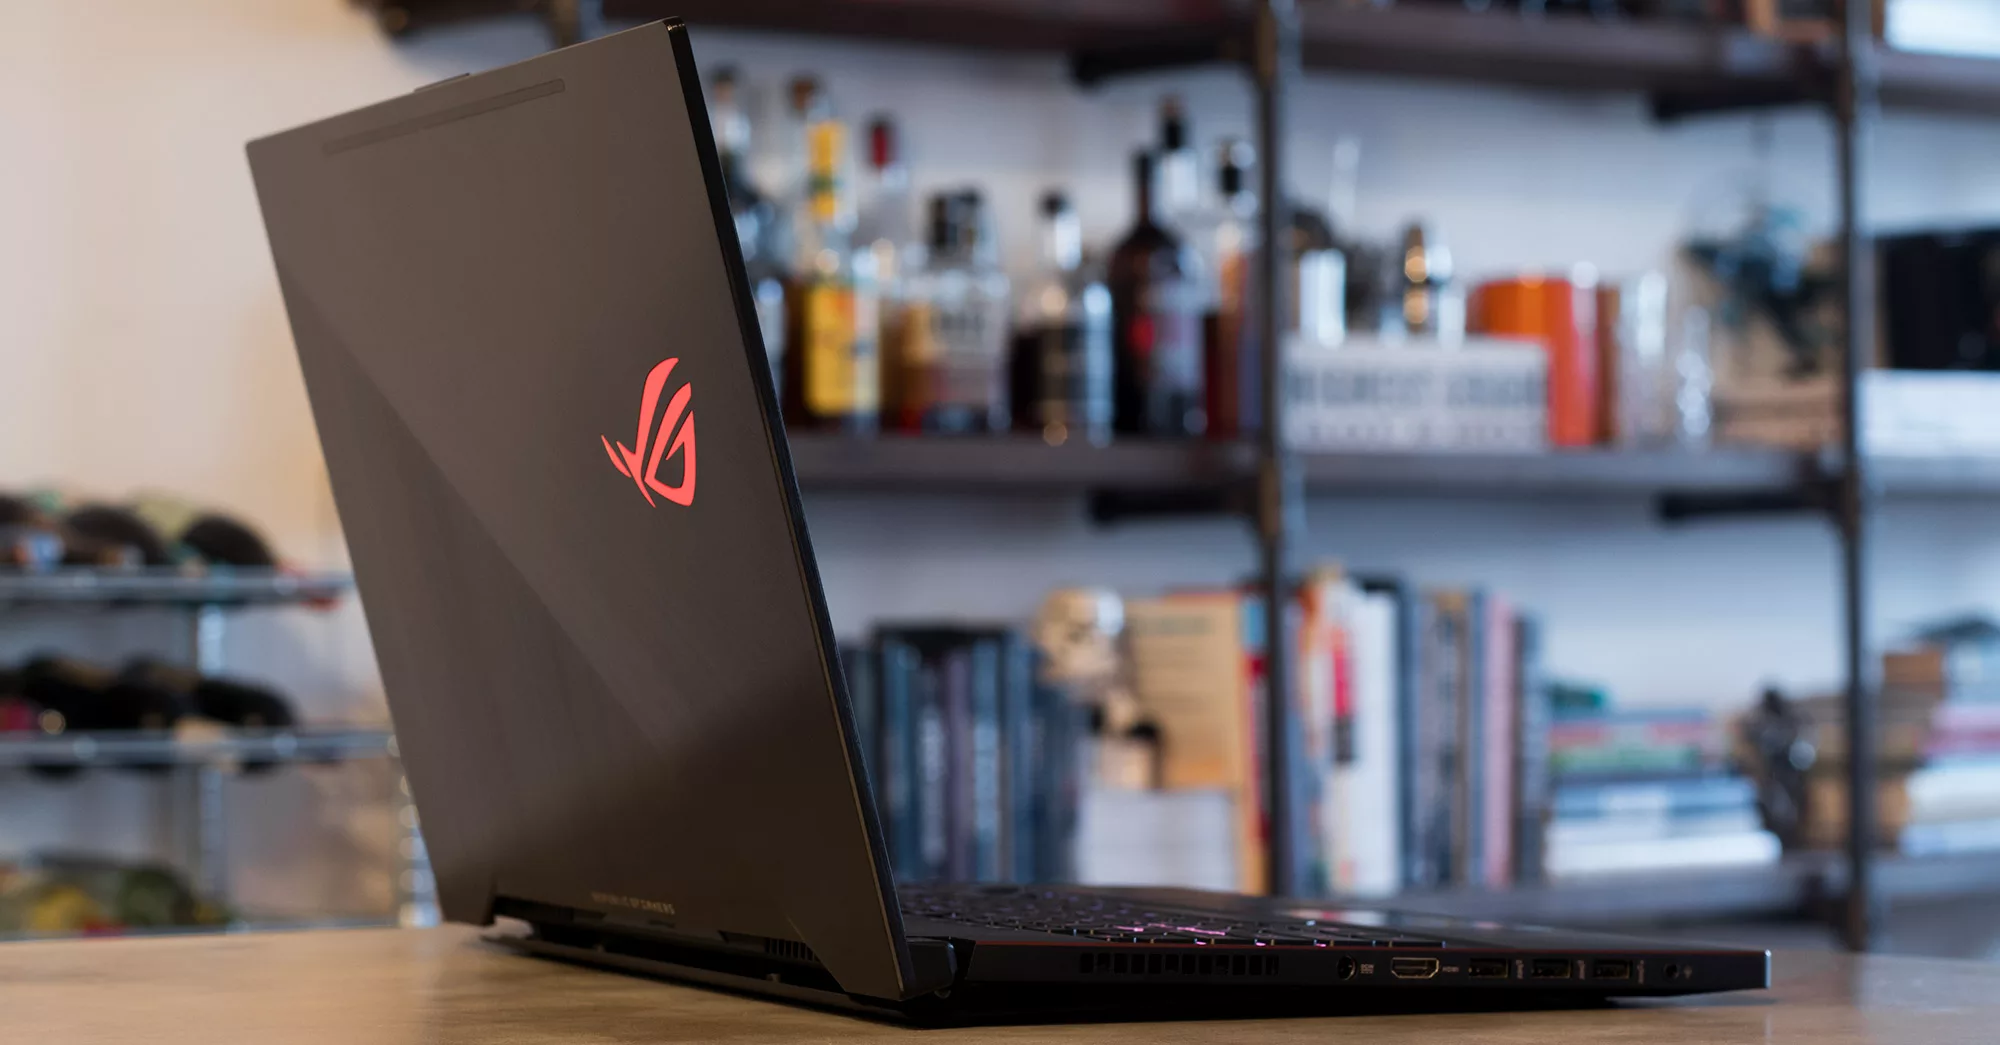 Introducing the ROG Zephyrus M GM501, an ultra-slim gaming laptop 